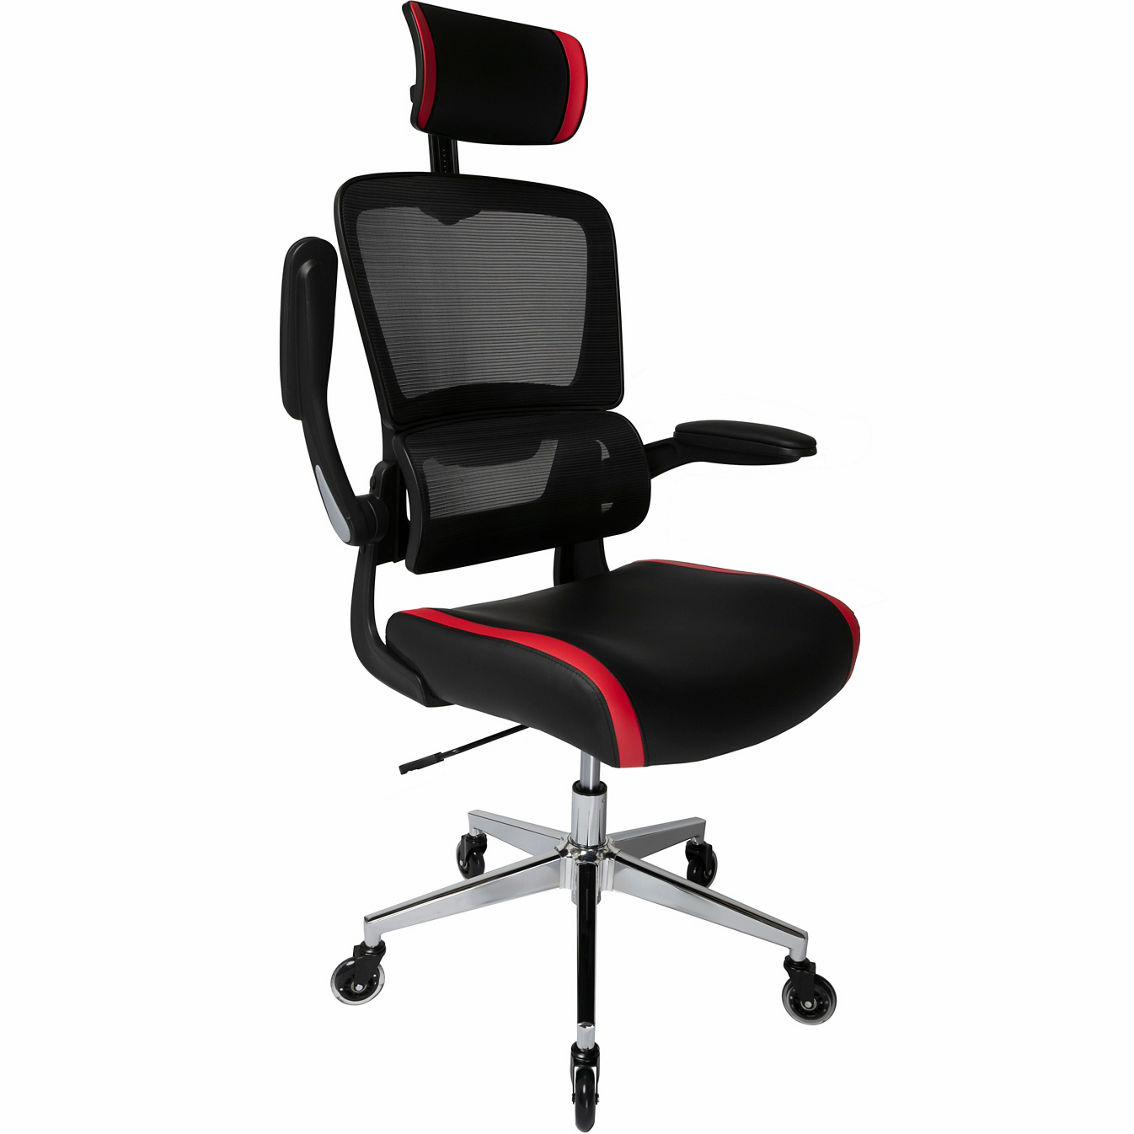 Simply Perfect Mesh Office Chair with Headrest - Image 4 of 10